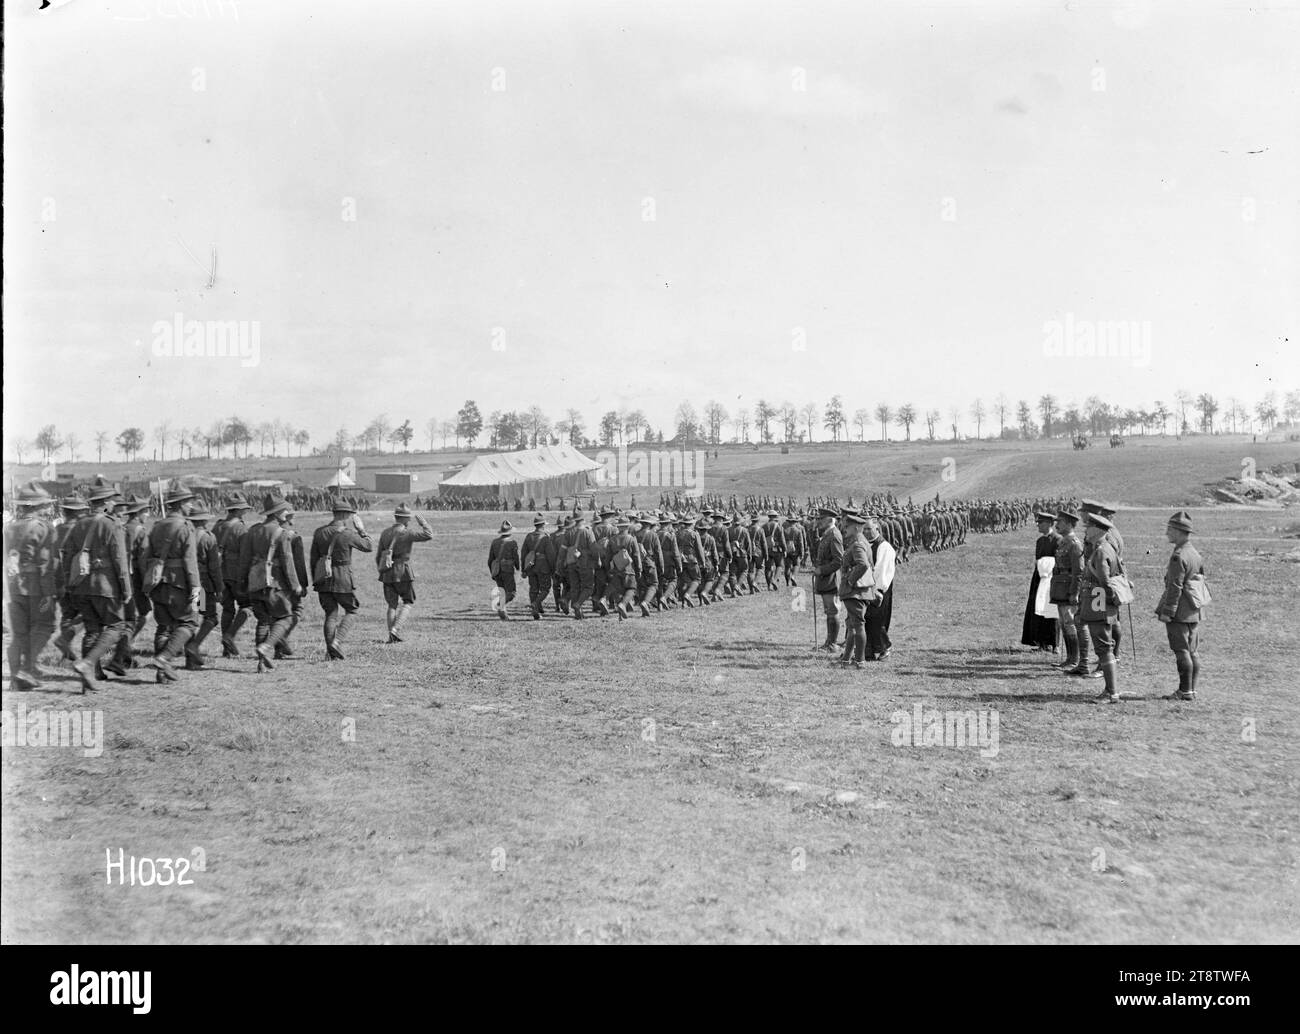 The salute after a New Zealand Brigade church service in France, World War I, A general view of the Corps Commander taking the salute after a New Zealand Brigade church service at Sapignies, France, during World War I. The Divisional Commanderl, General Russell, and the chaplain stand on his left. Other officers are behind them. Soldiers file past down a slight slope towards camp. Photograph taken 8 September 1918 Stock Photo